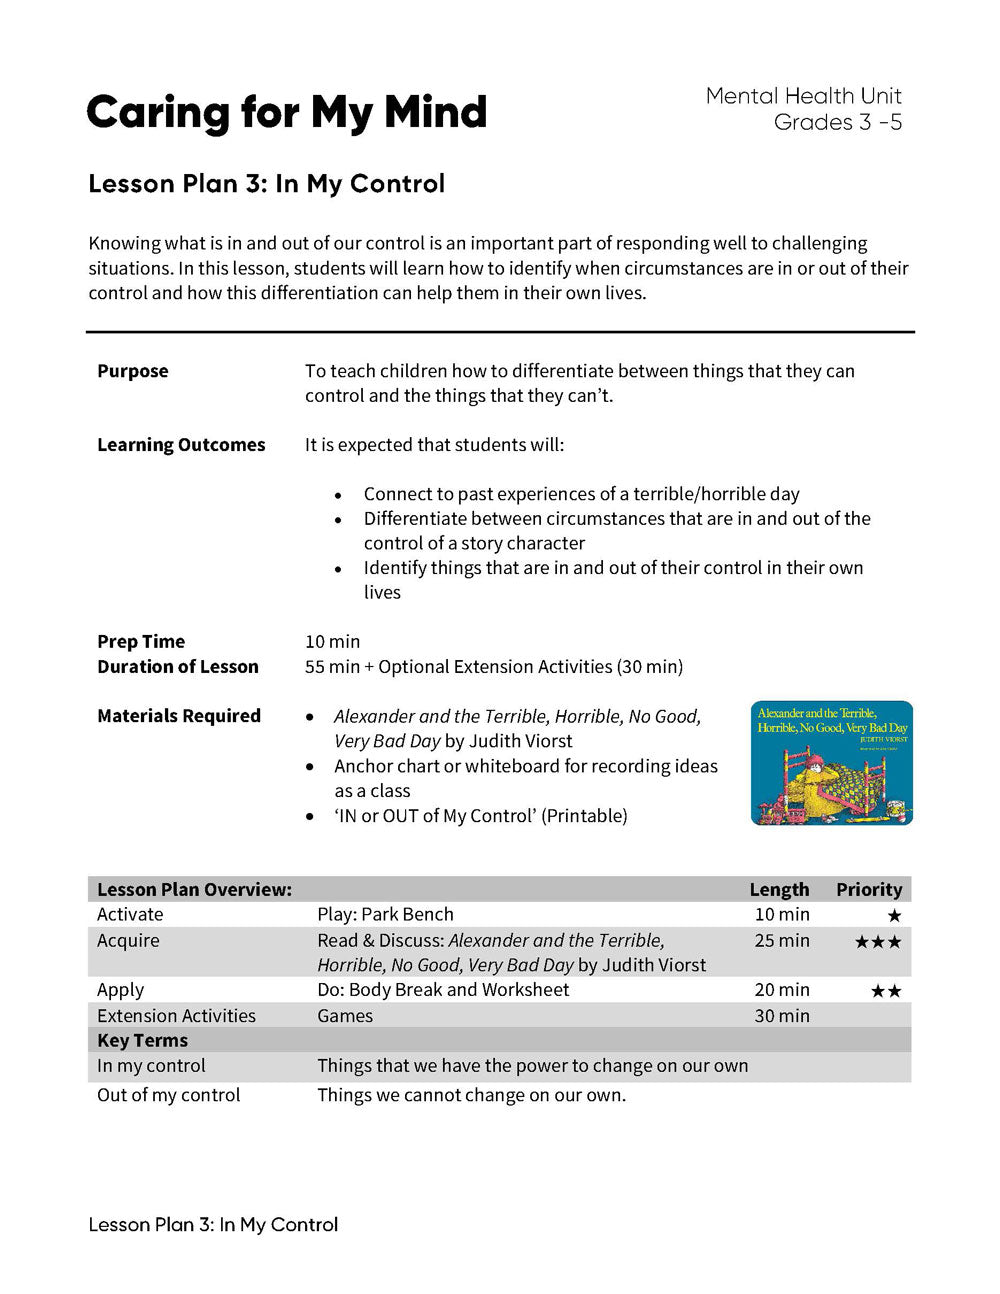 Lesson Plan 3: In My Control